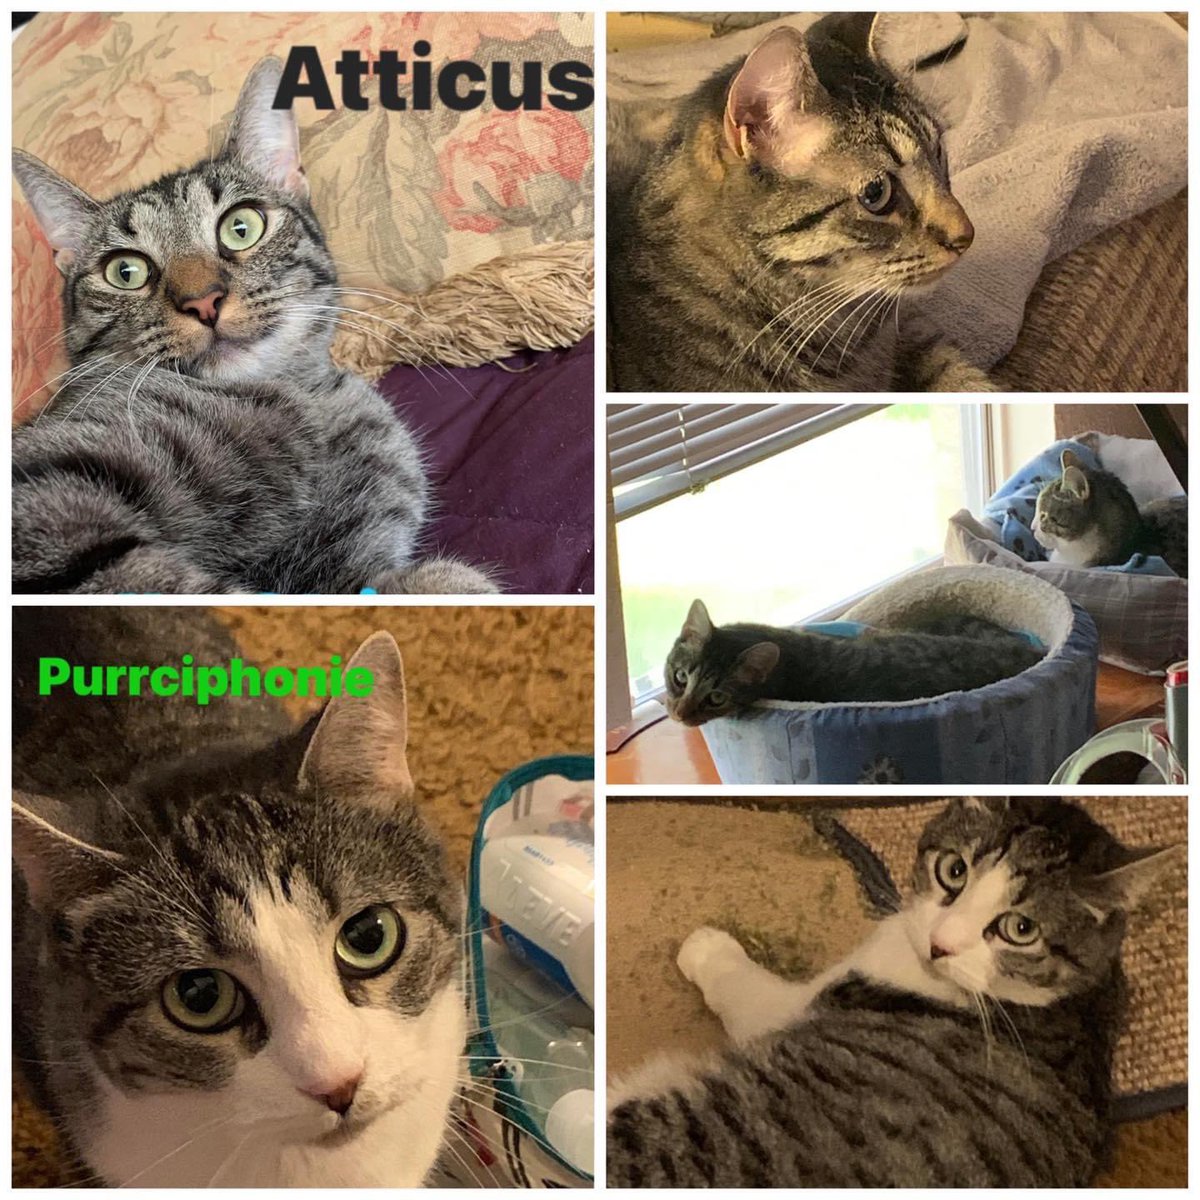 🐈‍⬛*Check meowt update*🐈 Atticus & Purrciphone (AAR names were Stormy & Shiner) are adult cats adopted in Sept 2021. See how happy these kitties are! From their family: ‘Purrciphonie is coming around, it is so nice. They play together. We love them so and they love us too. 😻😻’